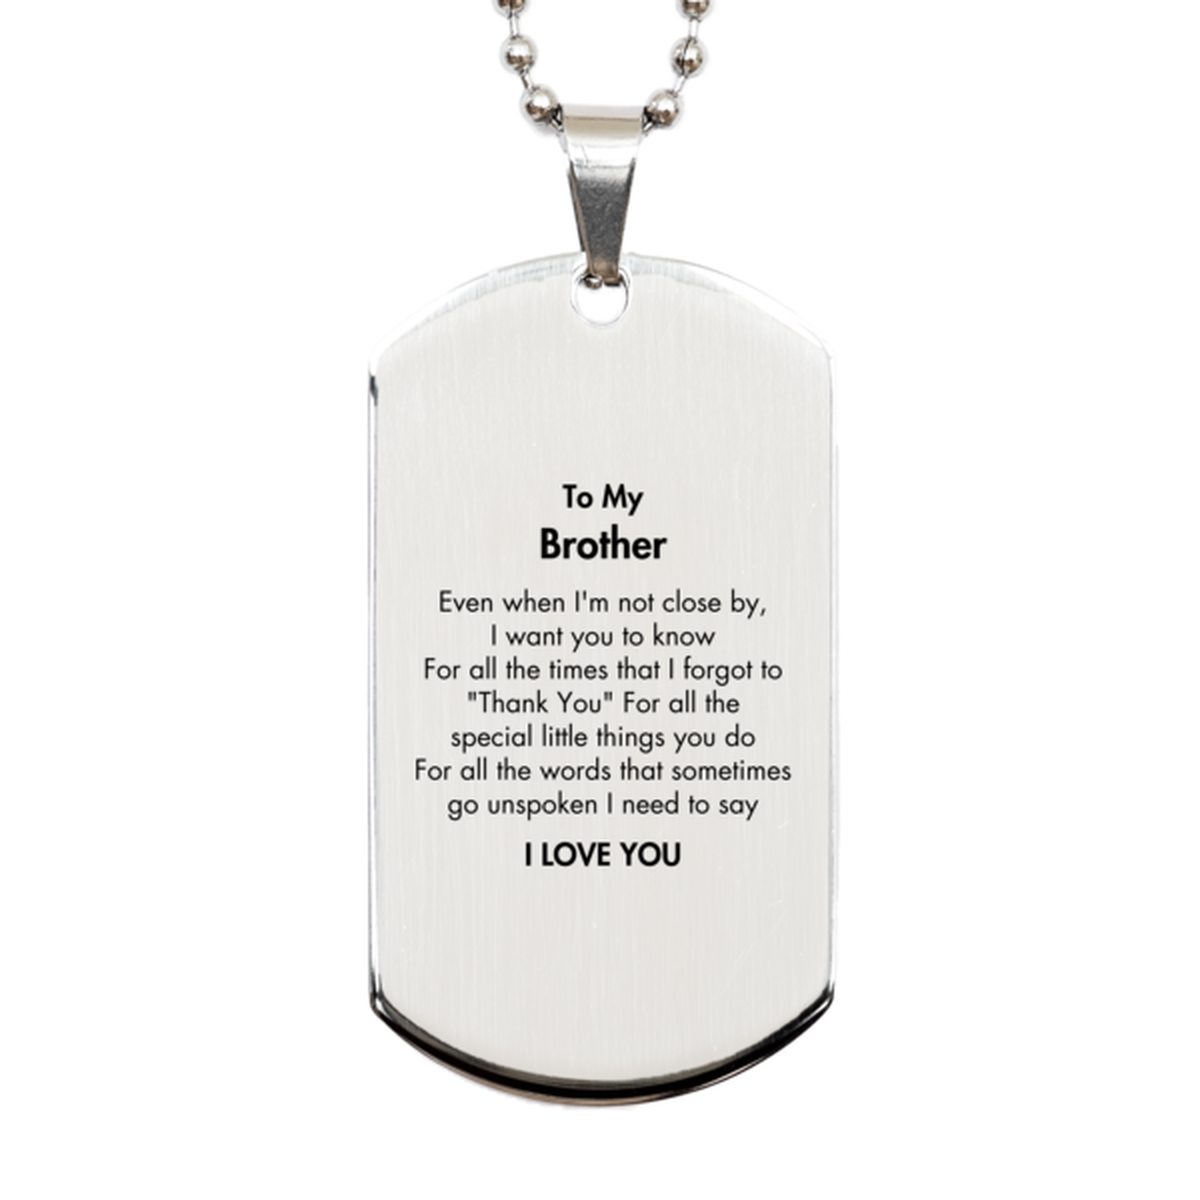 Thank You Gifts for Brother, Keepsake Silver Dog Tag Gifts for Brother Birthday Mother's day Father's Day Brother For all the words That sometimes go unspoken I need to say I LOVE YOU